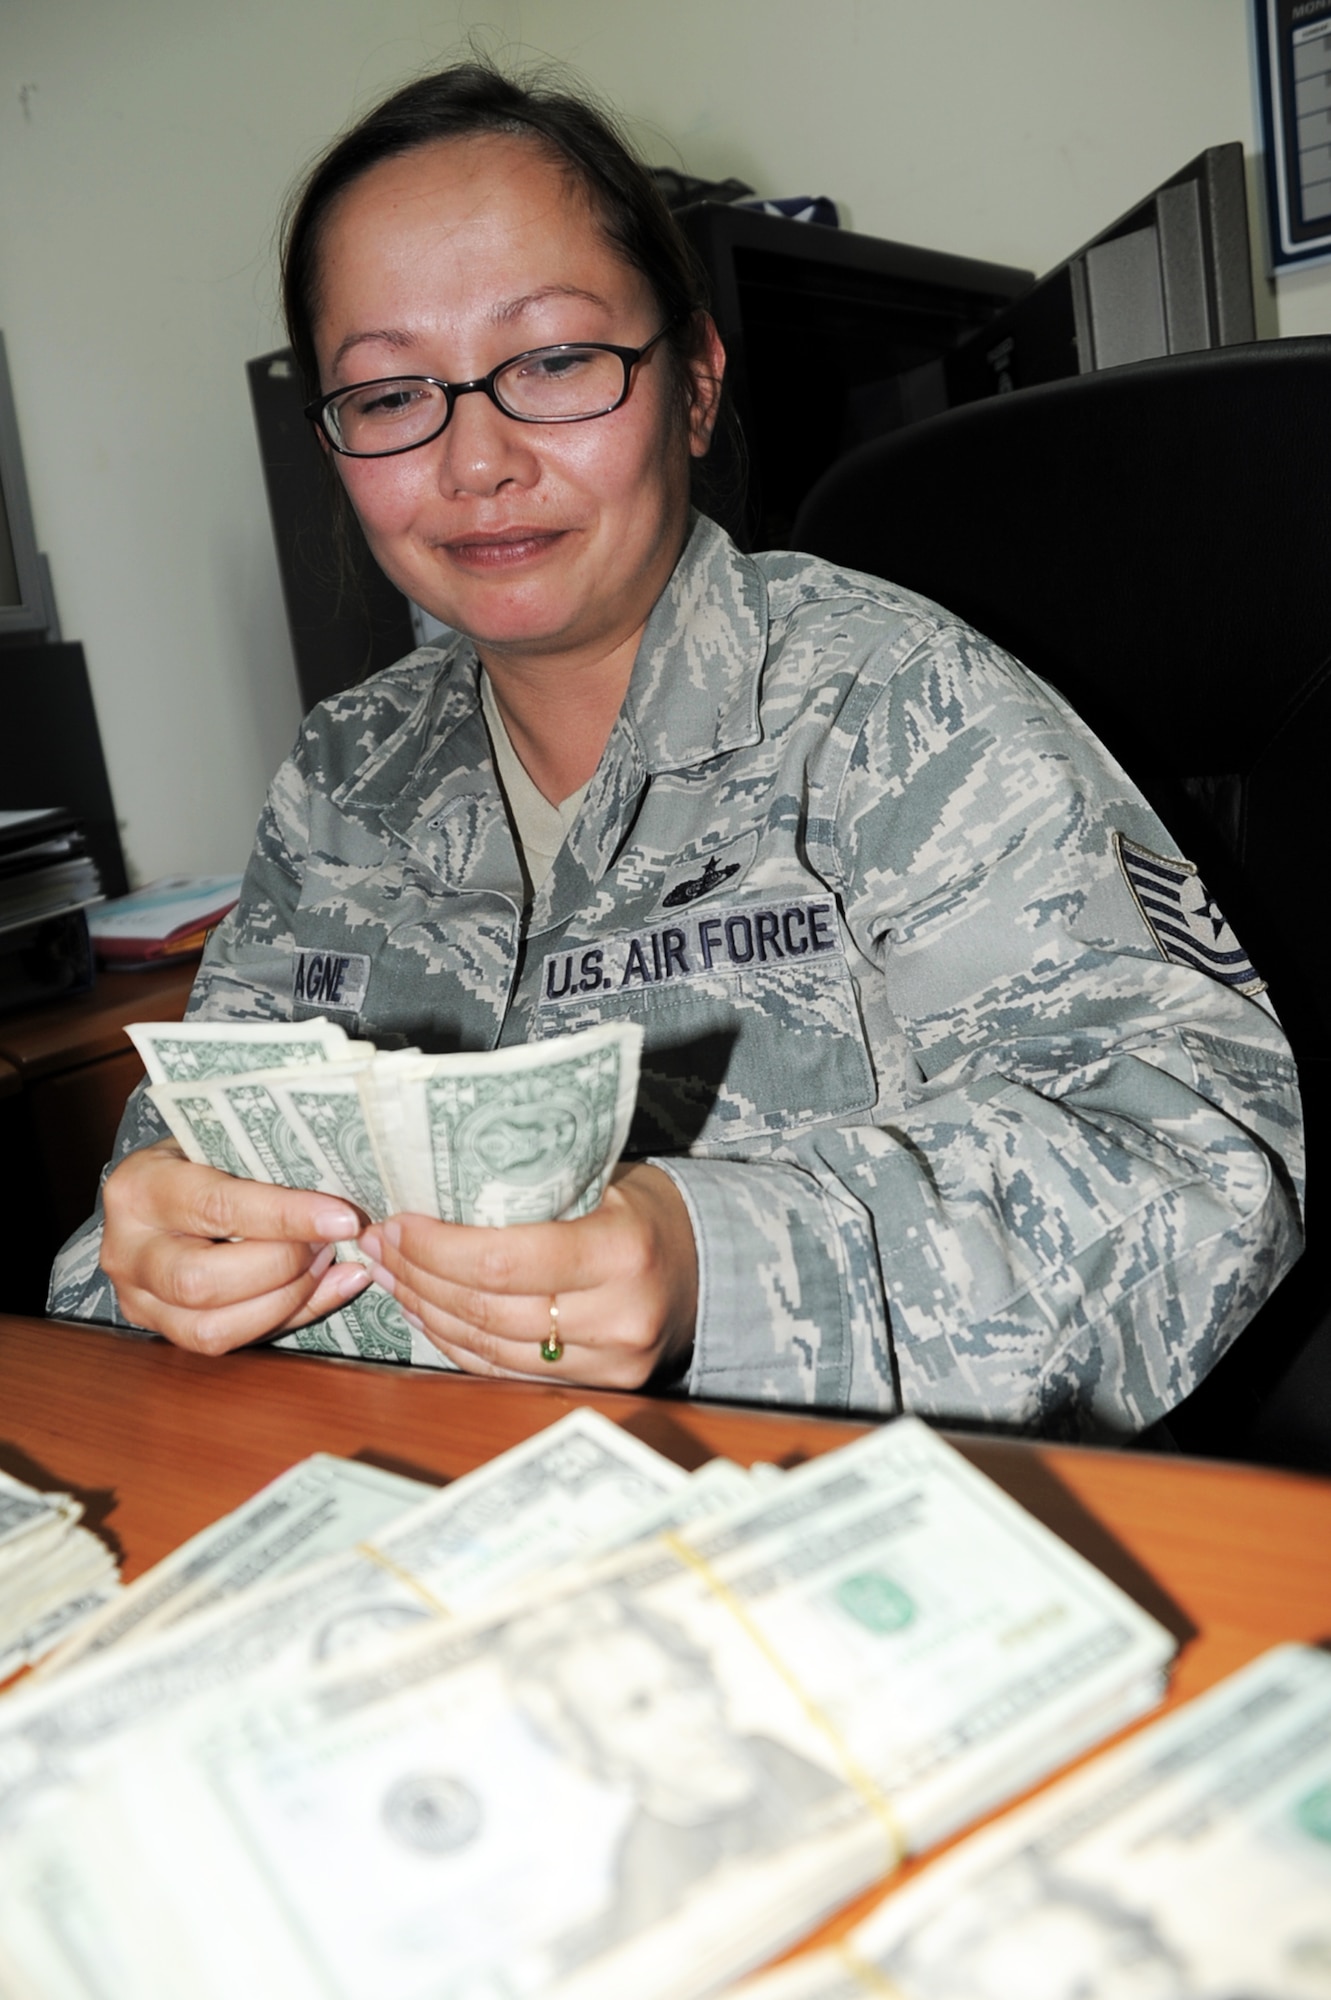 Tech. Sgt. Caroline M. Champagne, from the 380th Expeditionary Force Support Squadron at a non-disclosed base in Southwest Asia, counts cash used for non-appropriated fund morale and welfare activities in her deployed office Jan. 8, 2009. Sergeant Champagne, a 15-year Air Force veteran, is the non-appropriated fund, or NAF, custodian for the 380th Expeditionary Force Support Squadron at a non-disclosed base here. She is deployed from the 62nd Force Support Squadron at McChord Air Force Base, Wash. (U.S. Air Force Photo/Tech. Sgt. Scott T. Sturkol/Released)